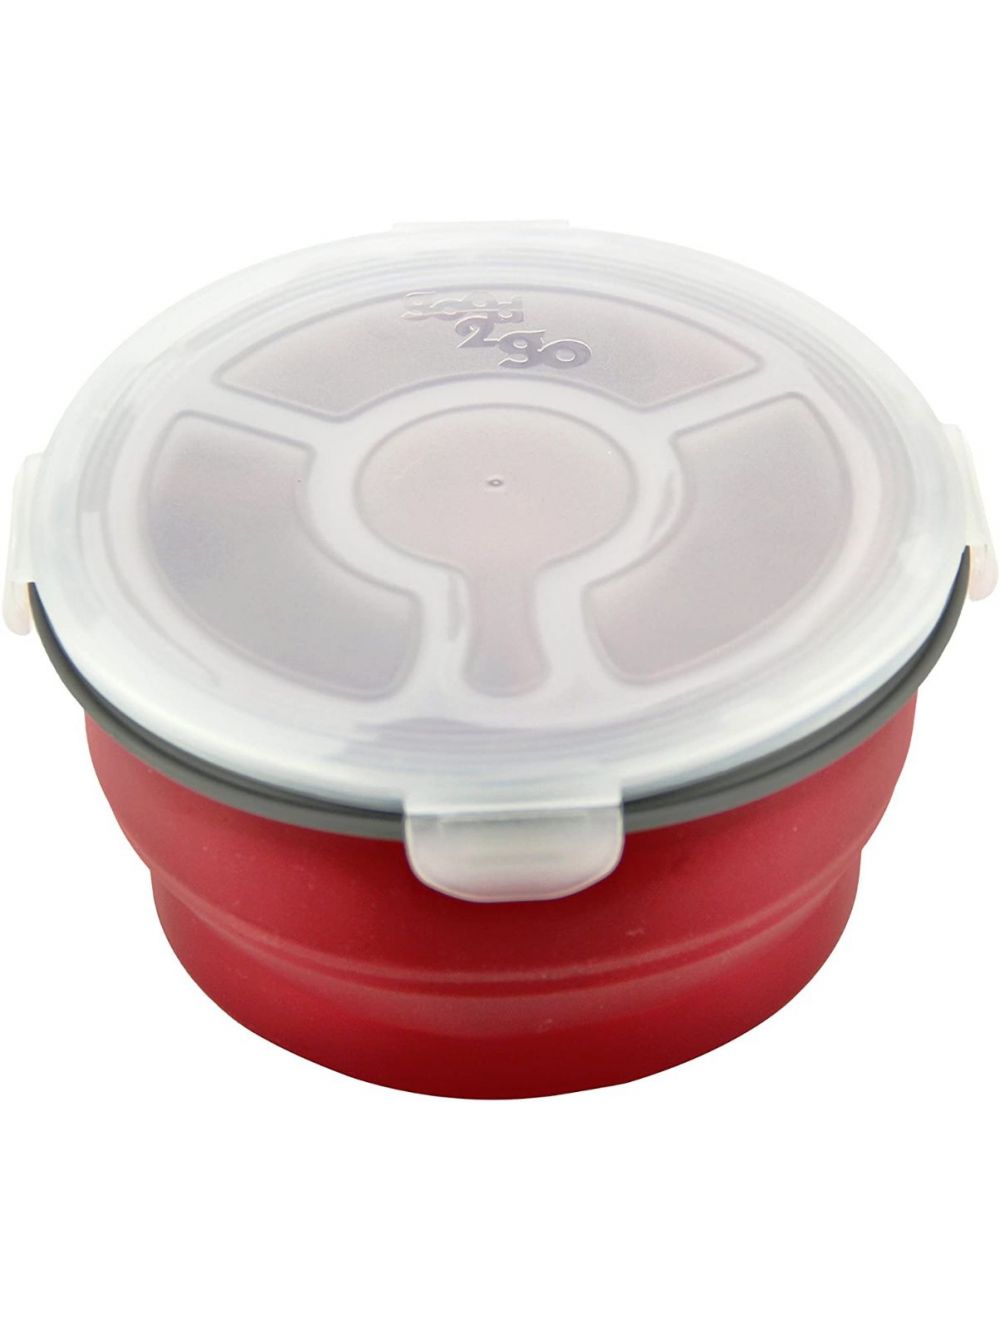 Good 2 Go Round With Compartment 1.8 L - Red-G35007